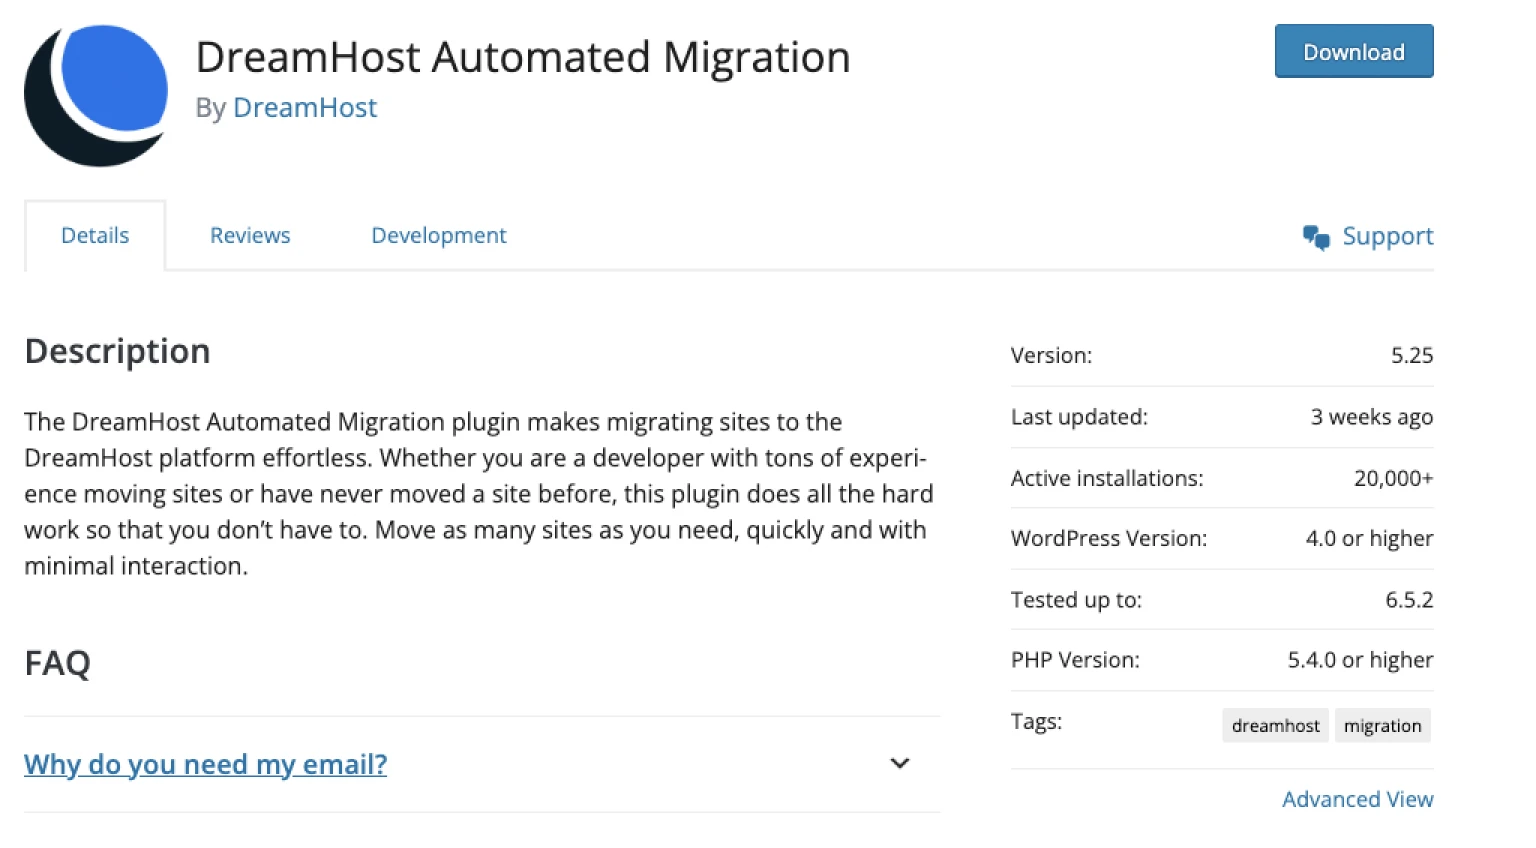 "DreamHost Automate Migration" WP plugin page with its description, FAQ, version, last updated, and PHP version.